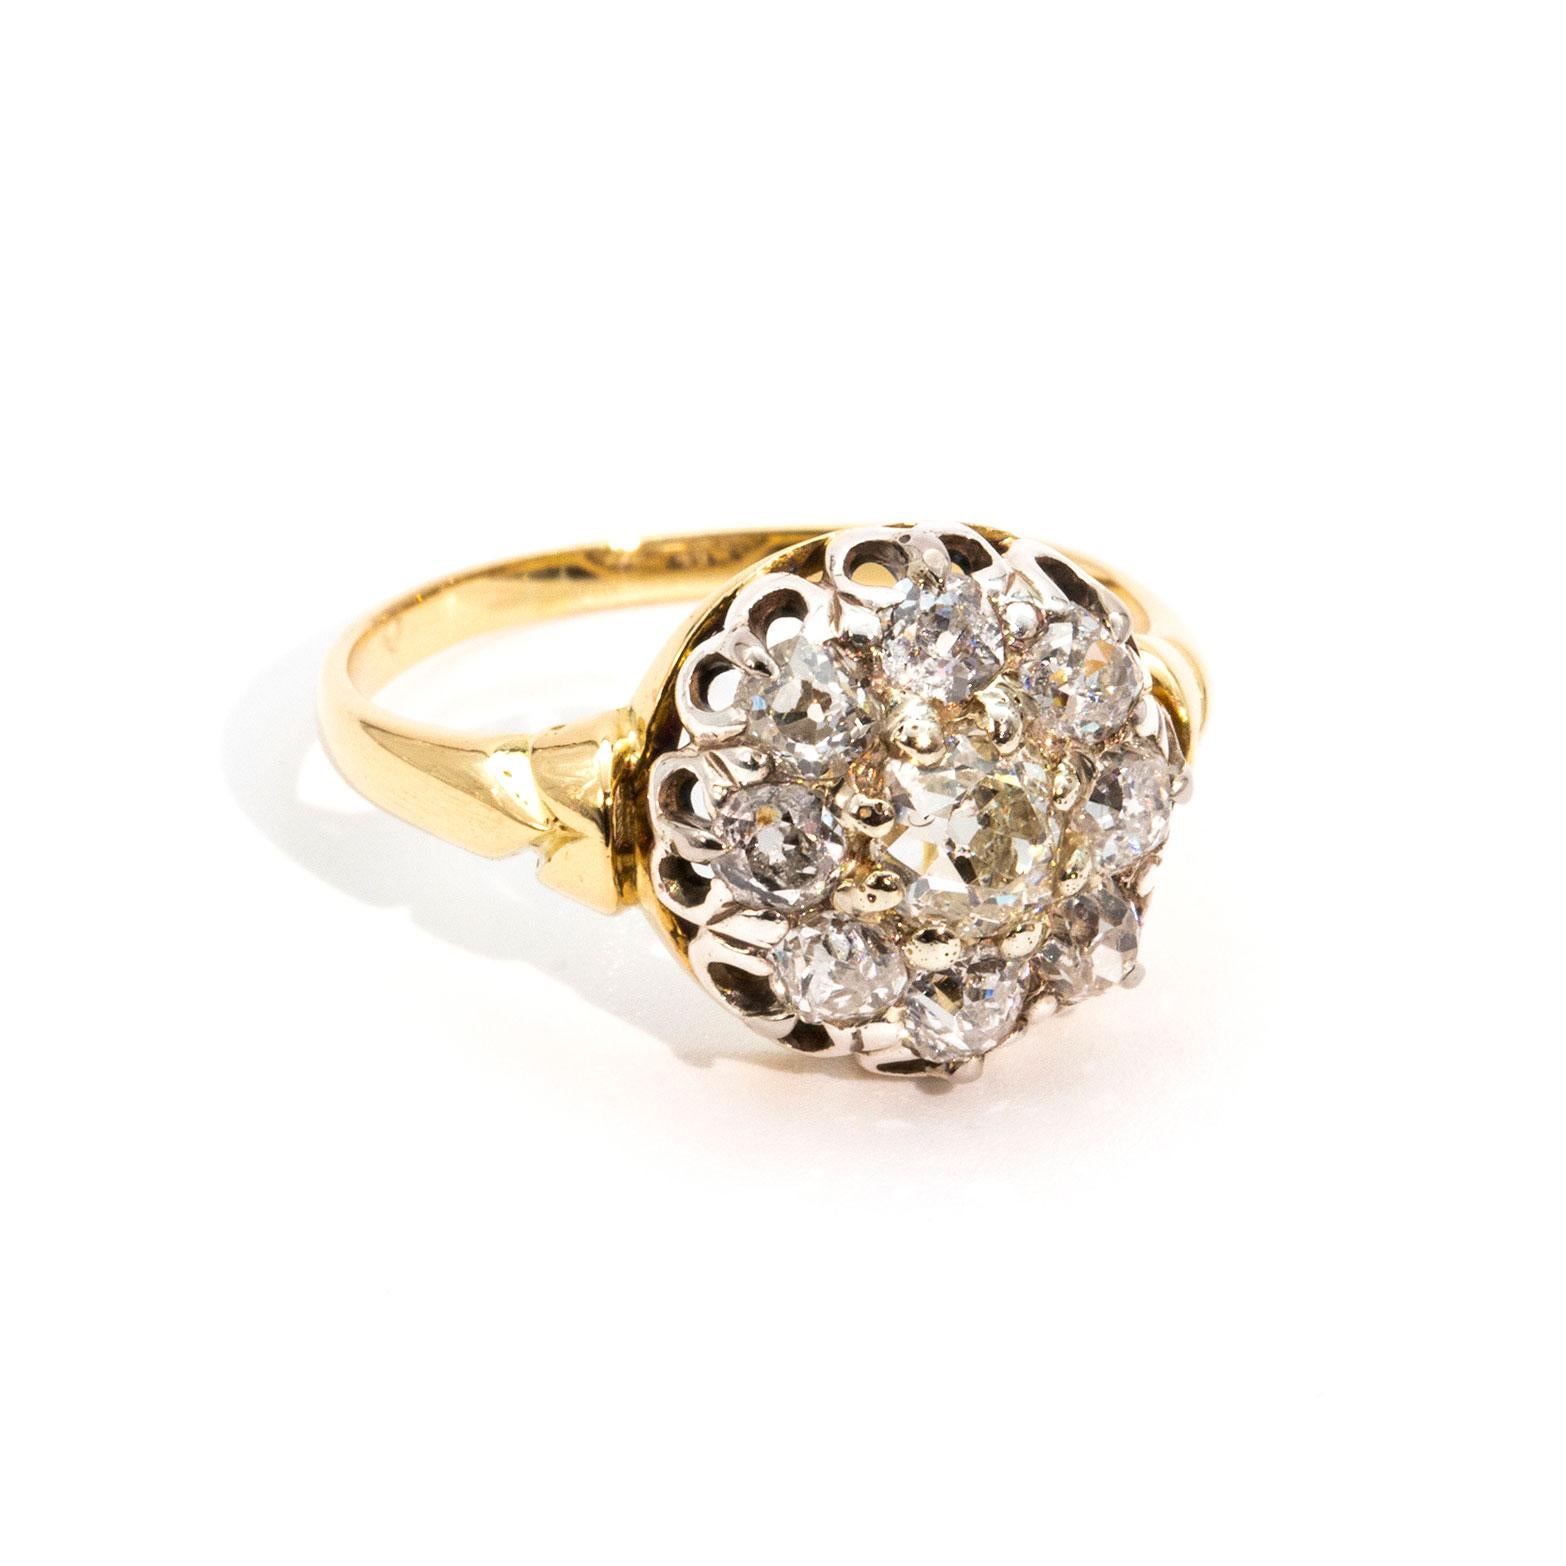 Forged in 18 carat gold is this wondrous cluster ring flaunting nine romantic claw set old cut diamonds totalling 1.46 carats.  We have named this piece of vintage fineness The Catherine Ring. The Catherine Ring is a traditional and classic ring